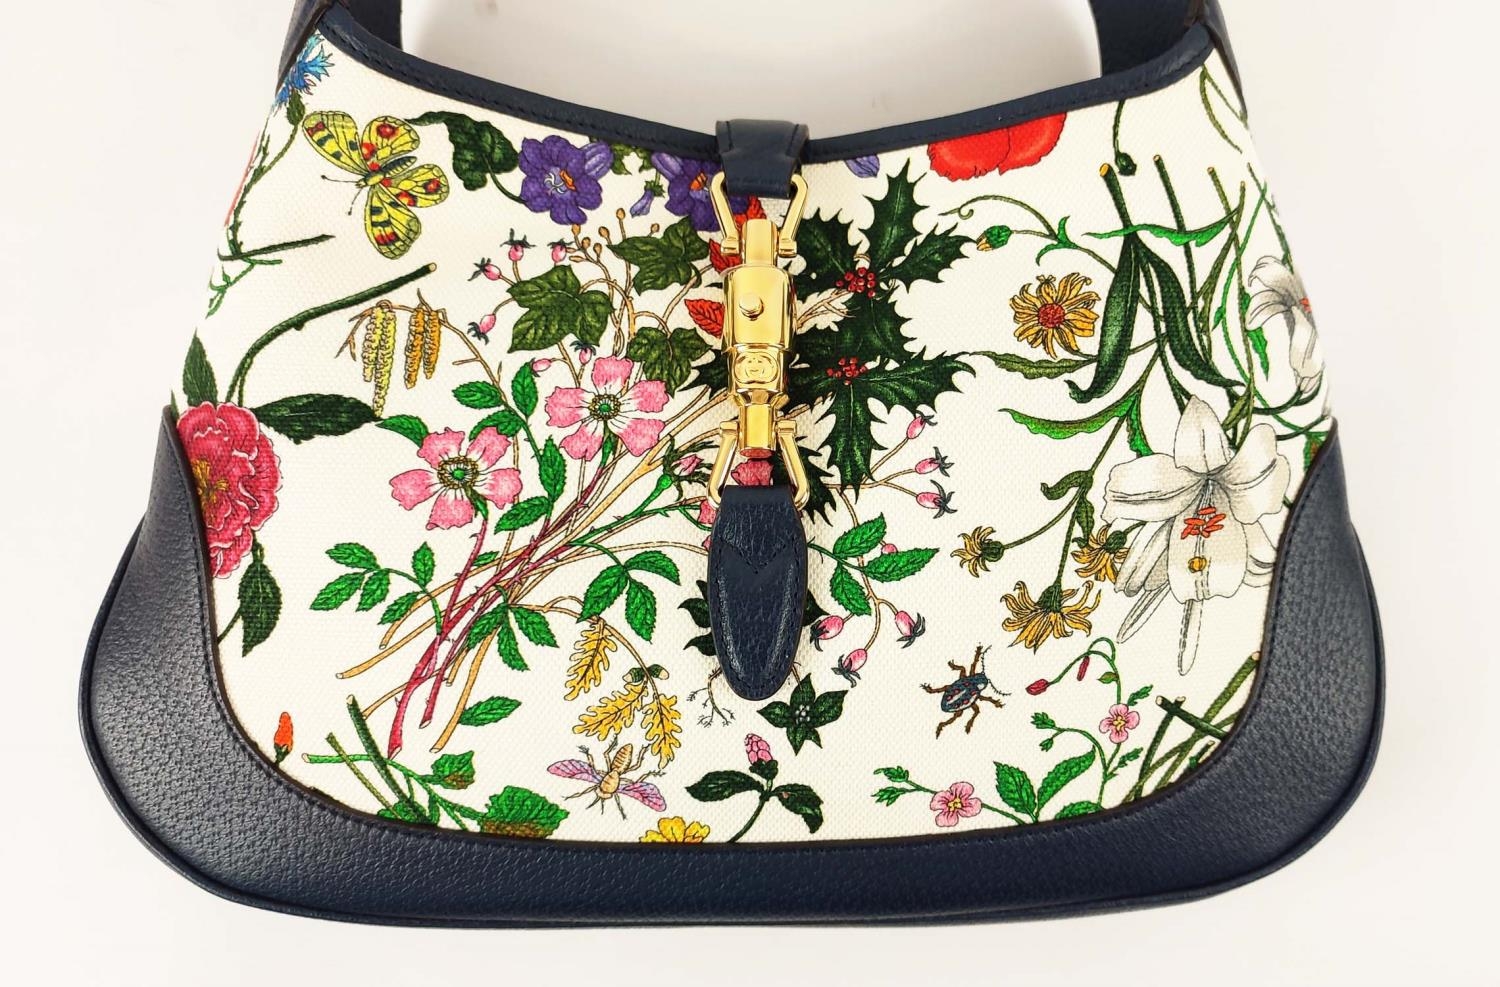 GUCCI JACKIE FLORA HOBO BAG, fabric floral pattern by Vittorio Accornero and navy blue leather - Image 3 of 8